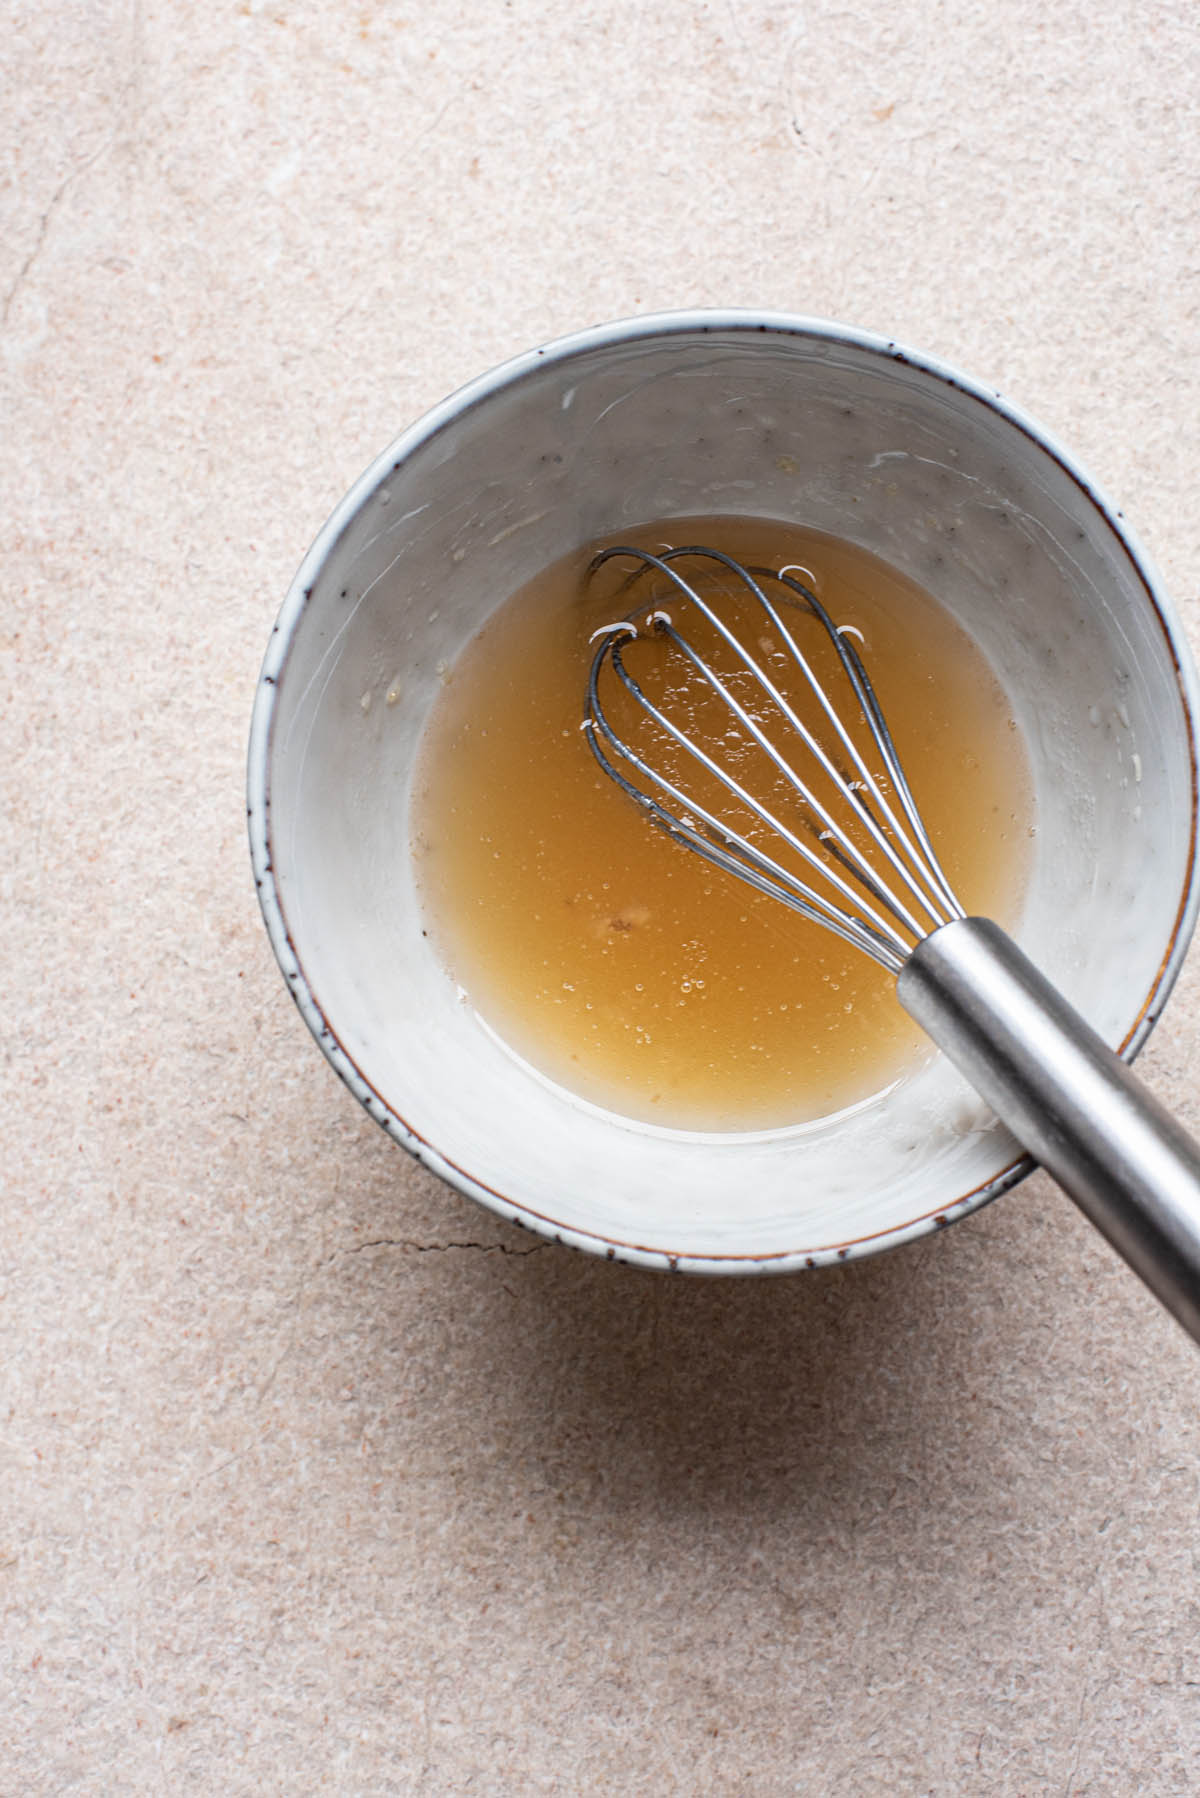 Honey mixture for cookies in a small ceramic bowl.